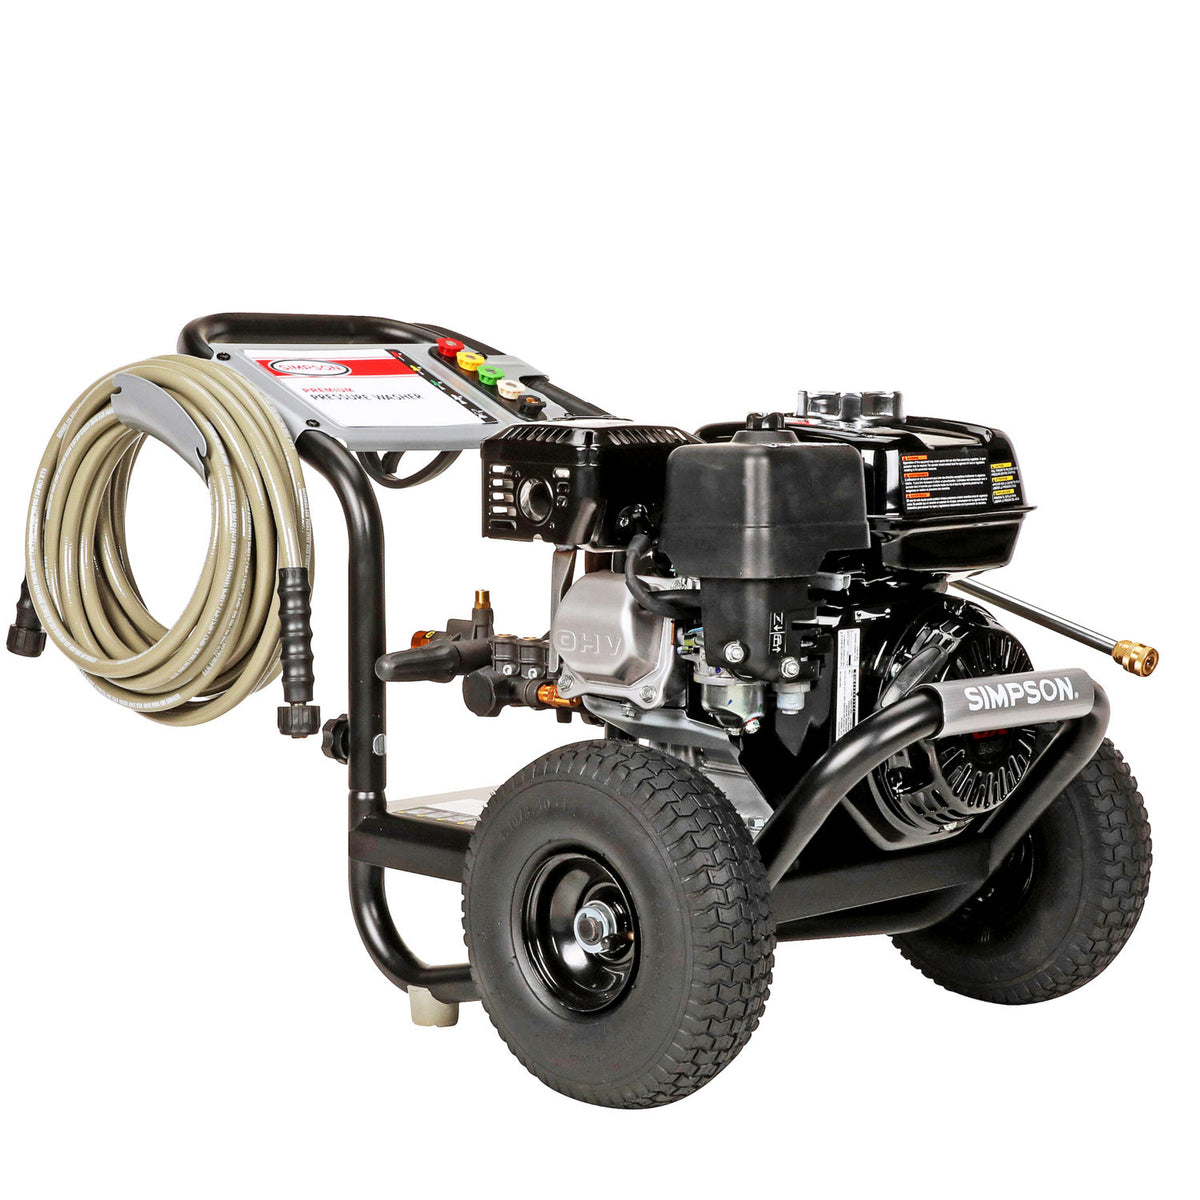 Simpson PS3228-S PowerShot 3300 PSI @ 2.5GPM Pressure Washer (Cold Water,  Gas) w/Honda Engine GX200